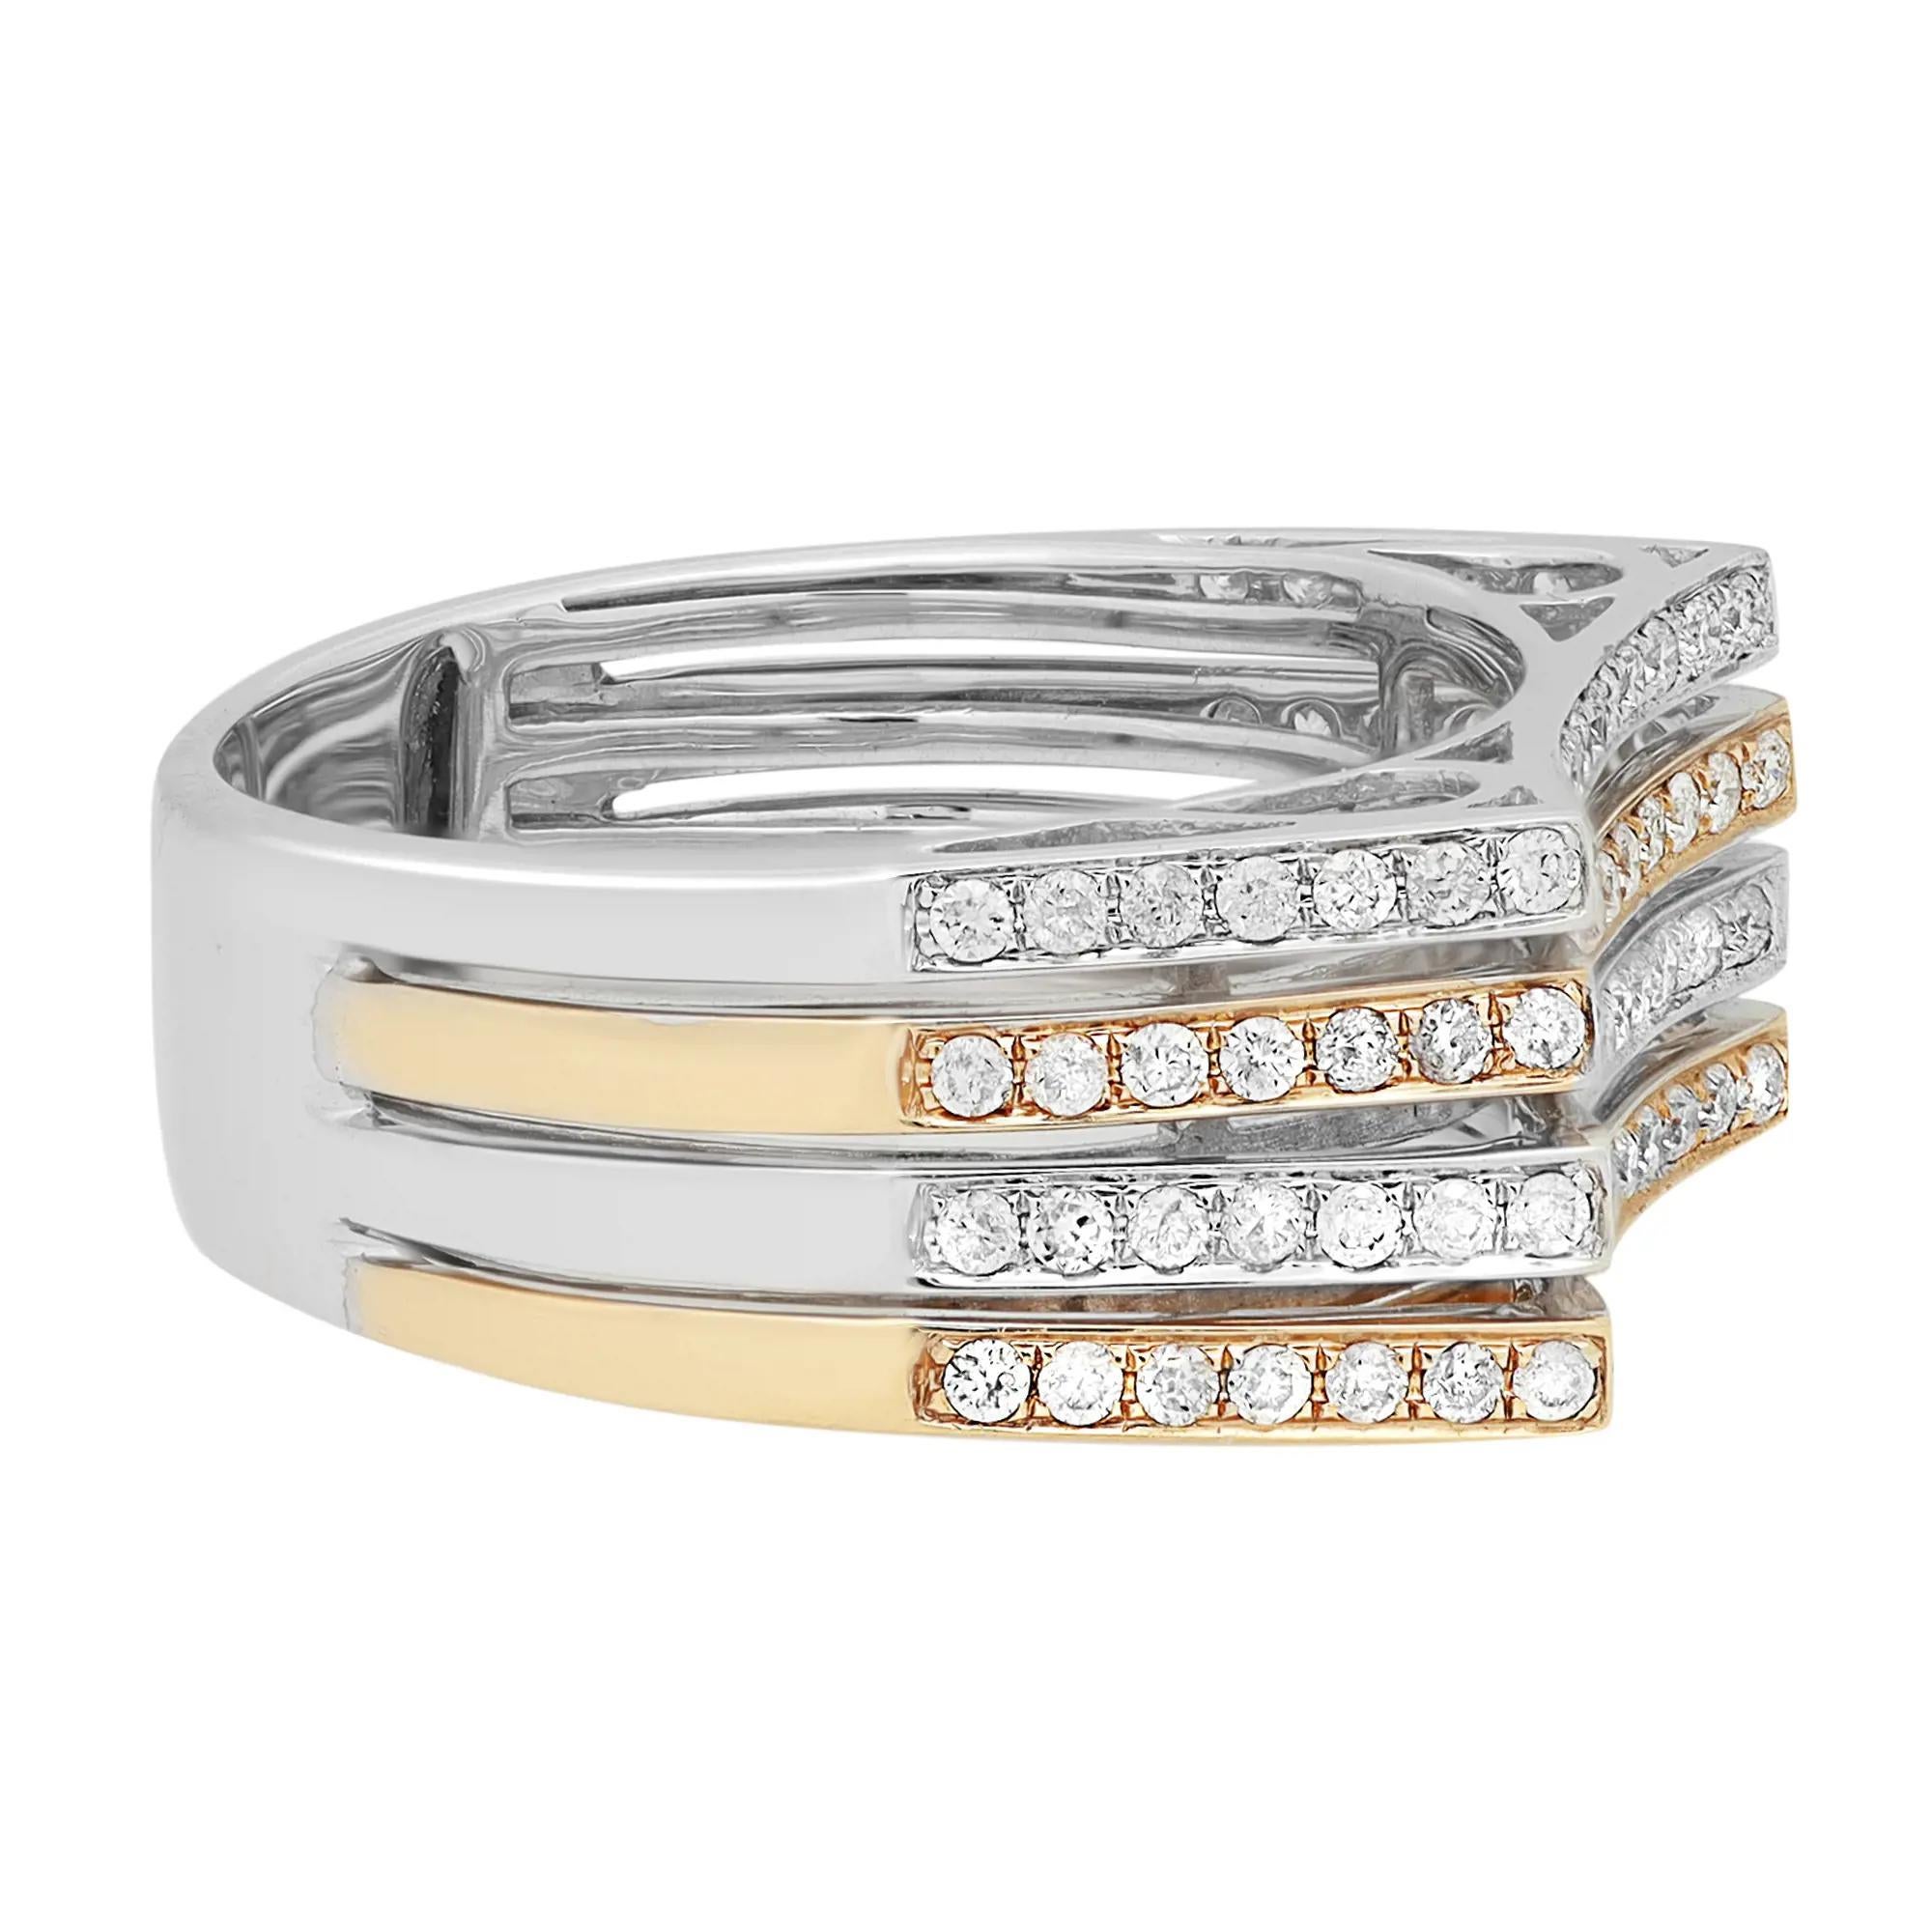 This elegant and classic diamond band ring is crafted in 14k white and yellow gold. Features four rows of pave set round brilliant cut diamonds weighing 0.70 carat. Diamond color I and SI -I clarity. Ring width: 8.5mm. Ring size: 7.5. Total weight: